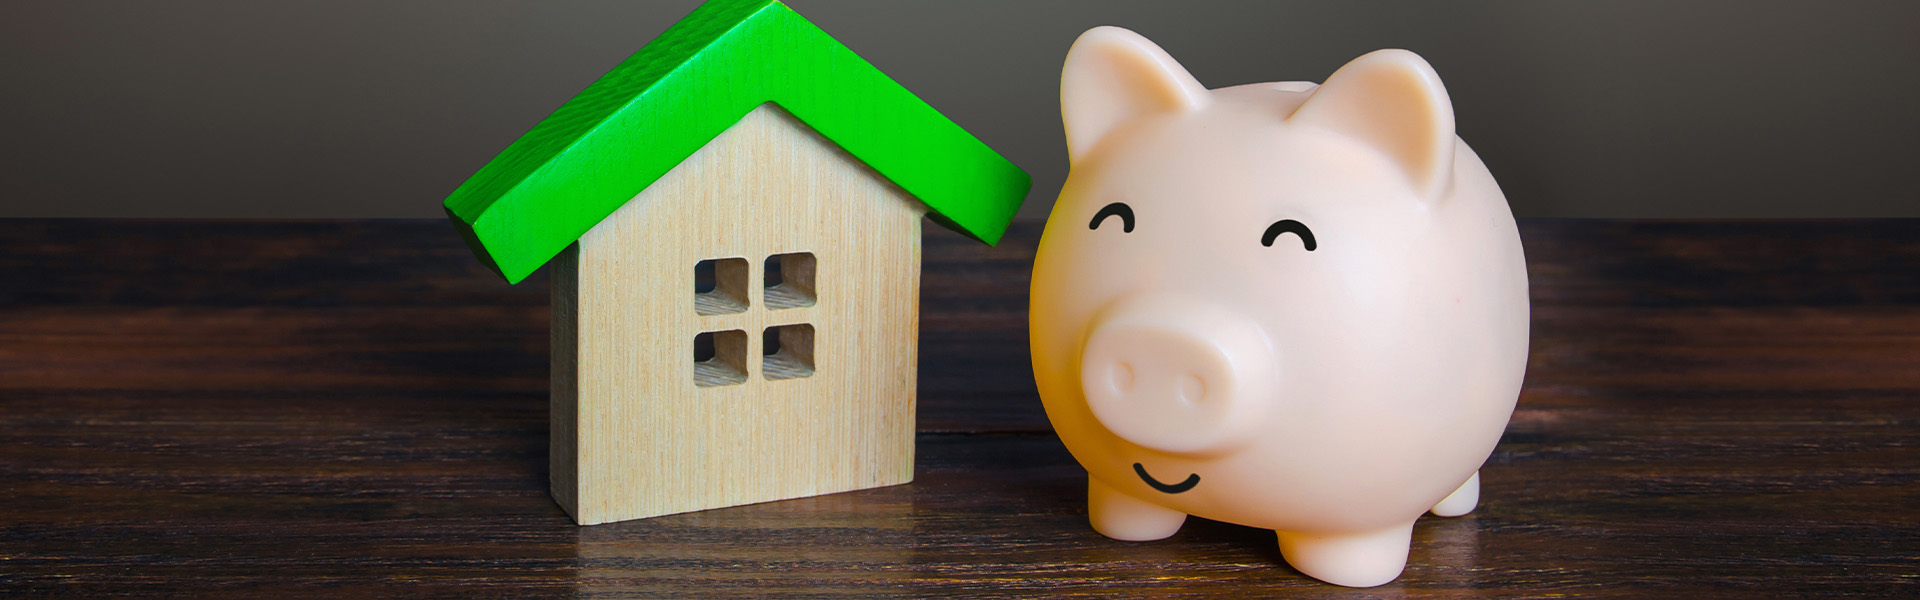 Piggy bank and house figure